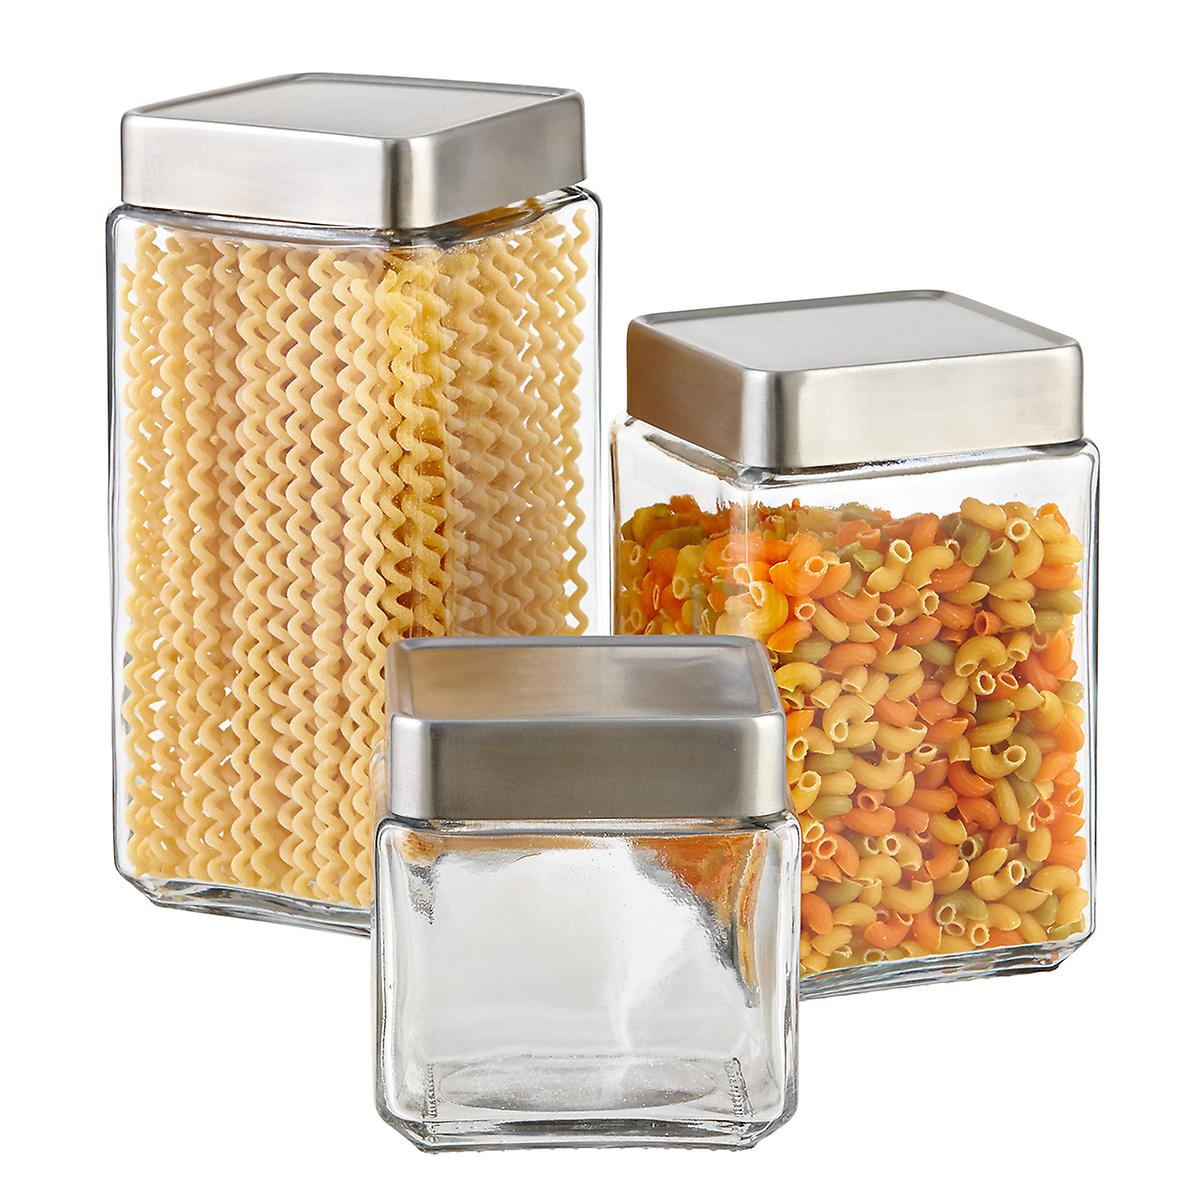 Anchor Hocking Glass & Brushed Aluminum Canisters